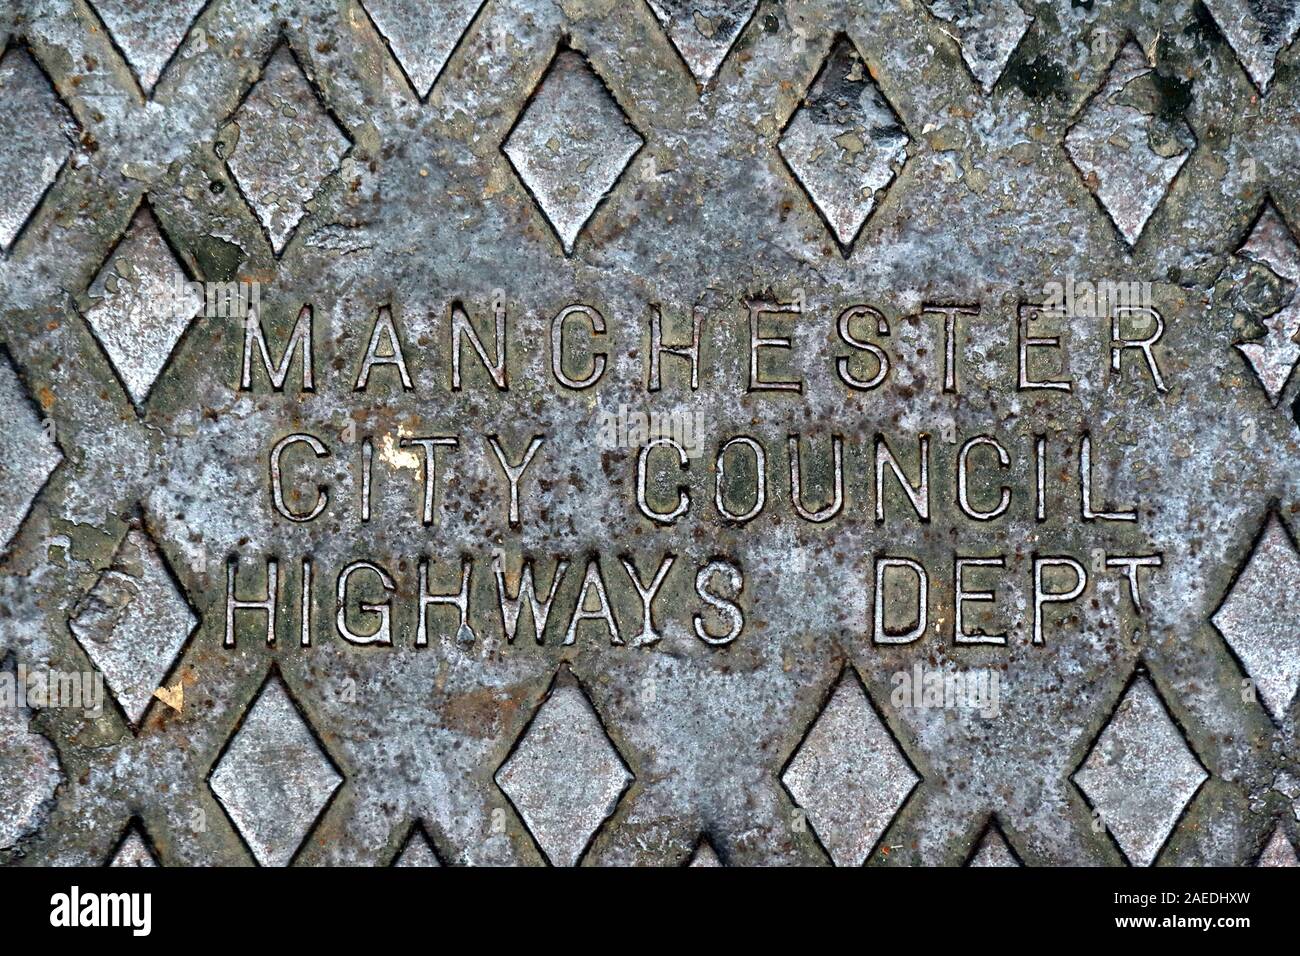 Manchester City Council Highways Dept, Manhole cover, Greater Manchester, Angleterre, Royaume-Uni Banque D'Images